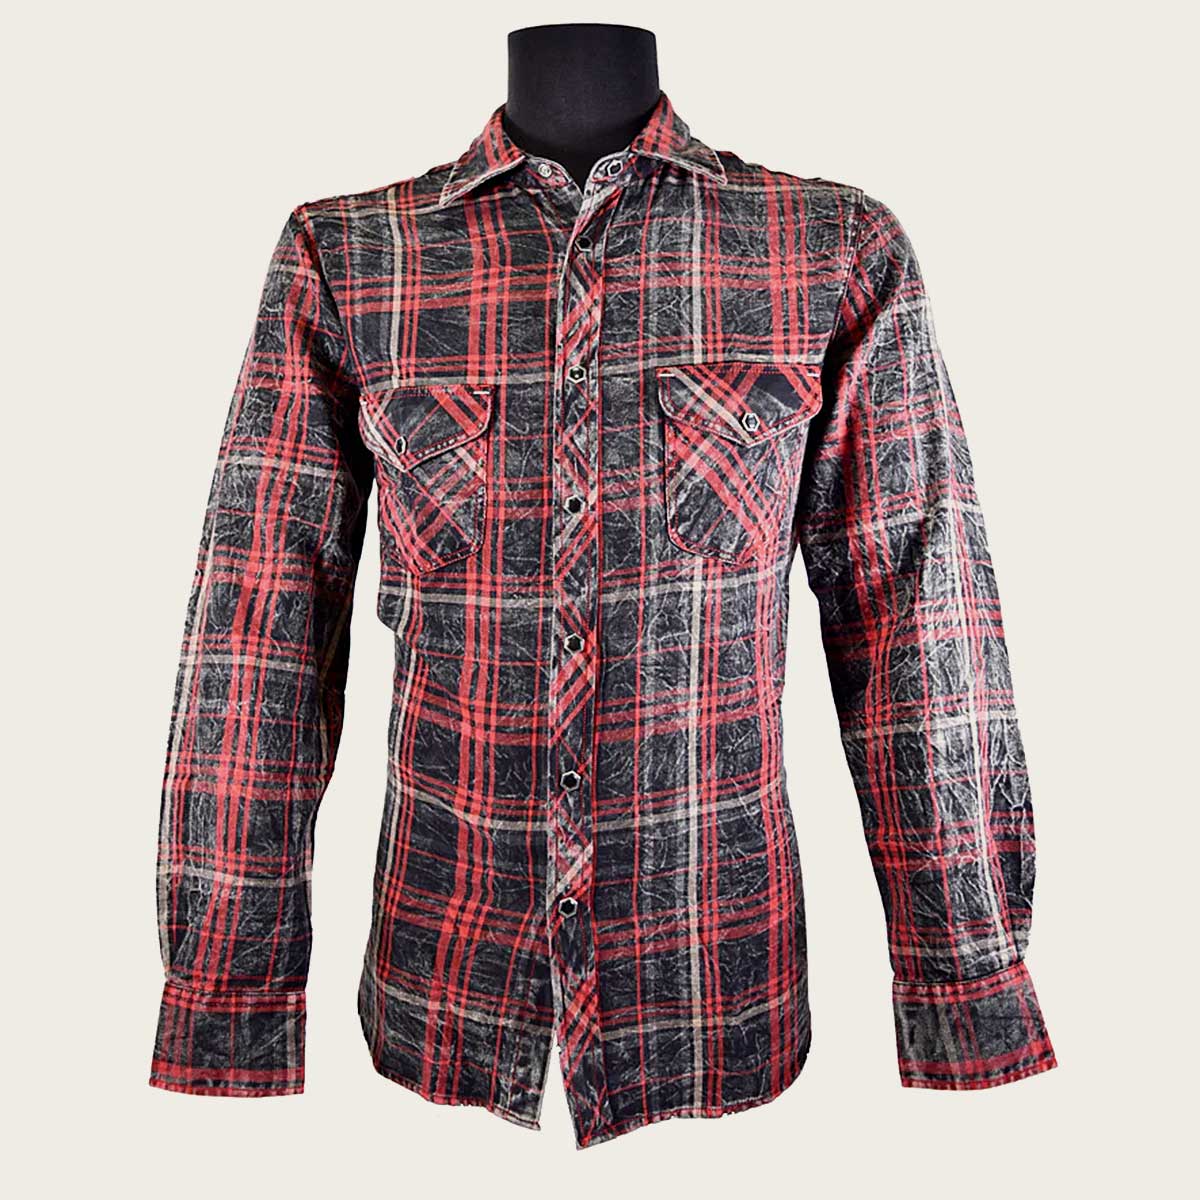 Black shirt for men with checkered print